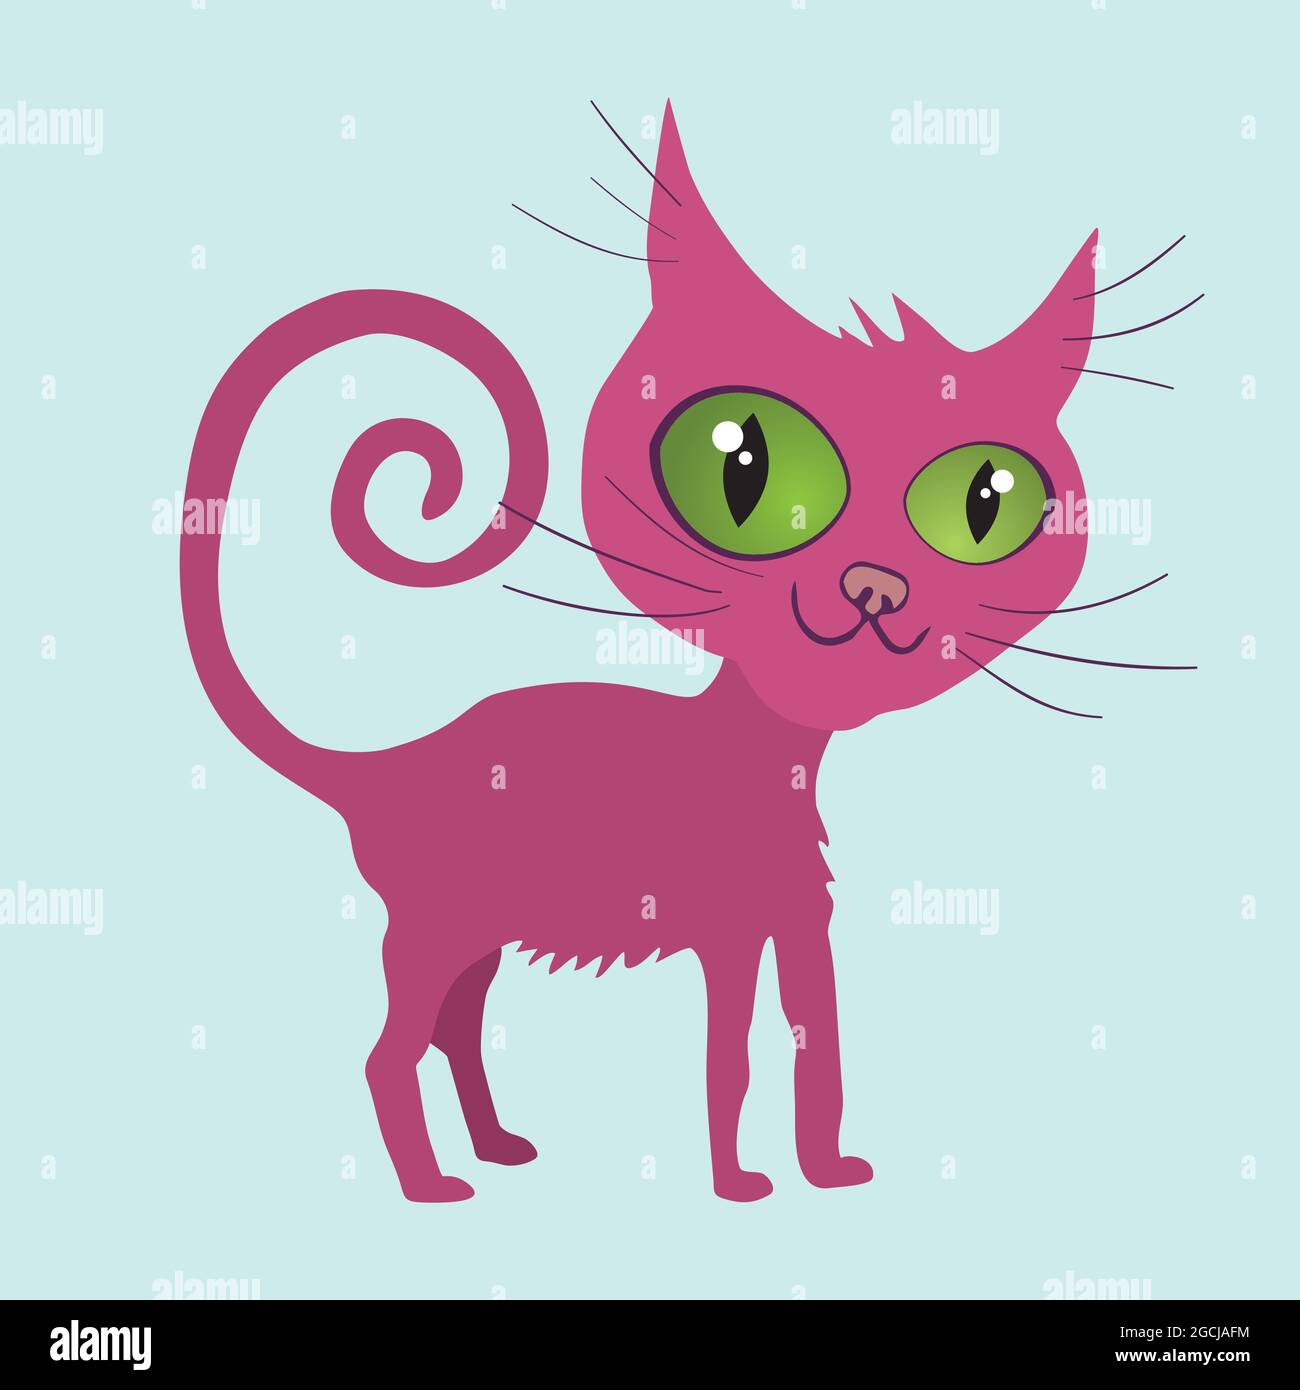 An illustration of a funny pink cat. He has big green eyes and a curly tail. Stock Vector